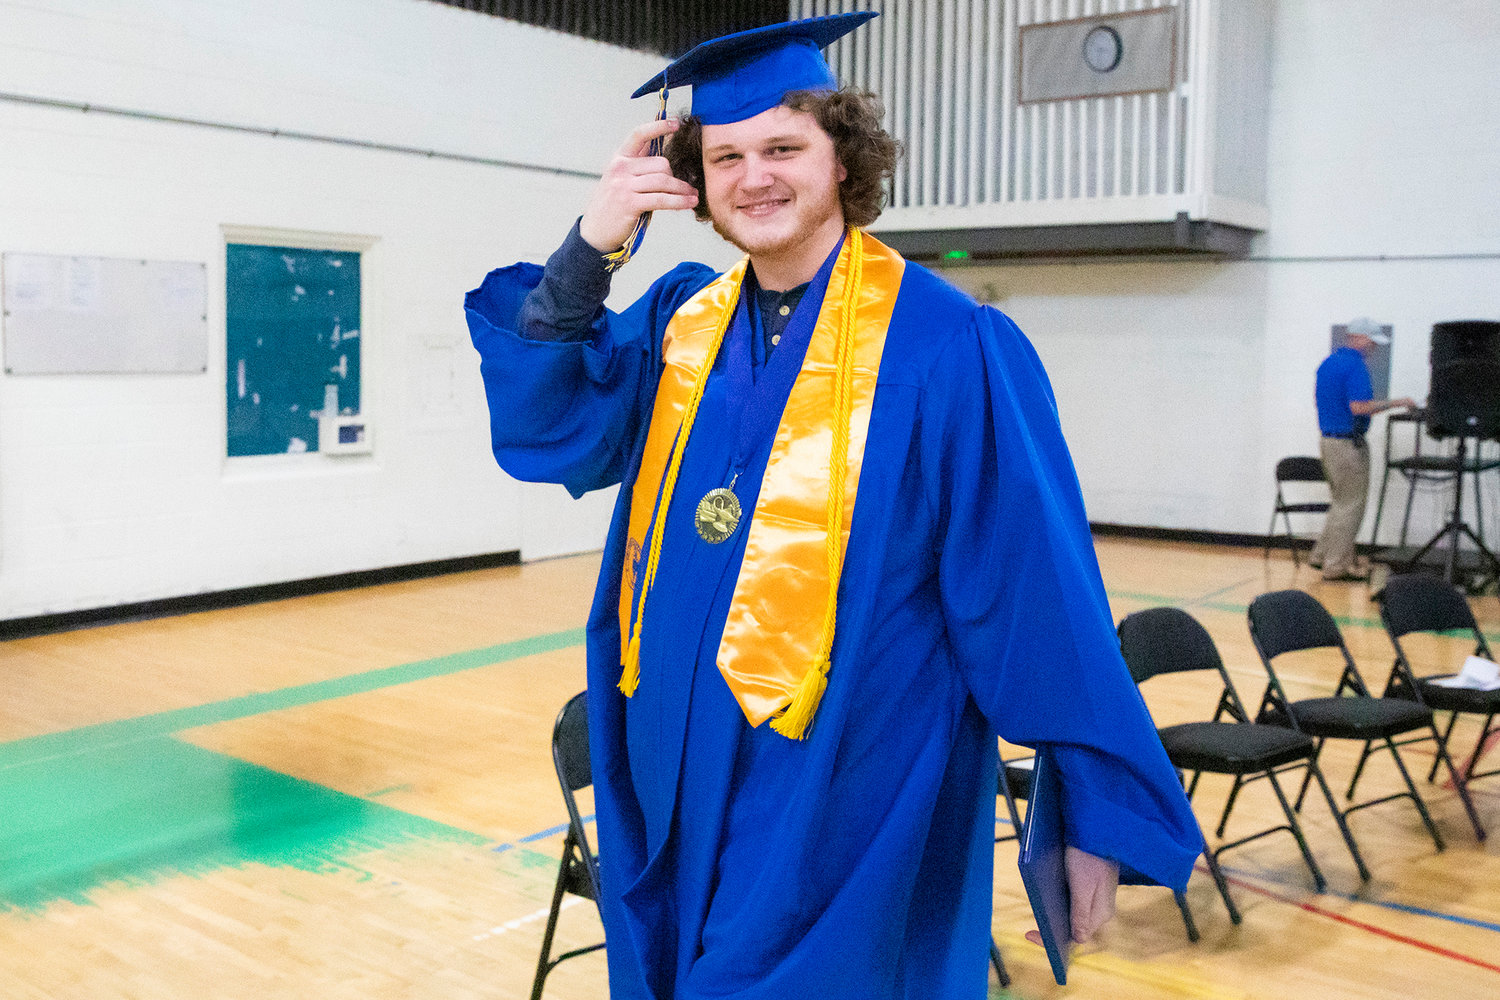 Zachary Carver smiles after getting his diploma on stage during a graduation ceremony for Centralia College graduates held at the Green Hill School on Wednesday in Chehalis.